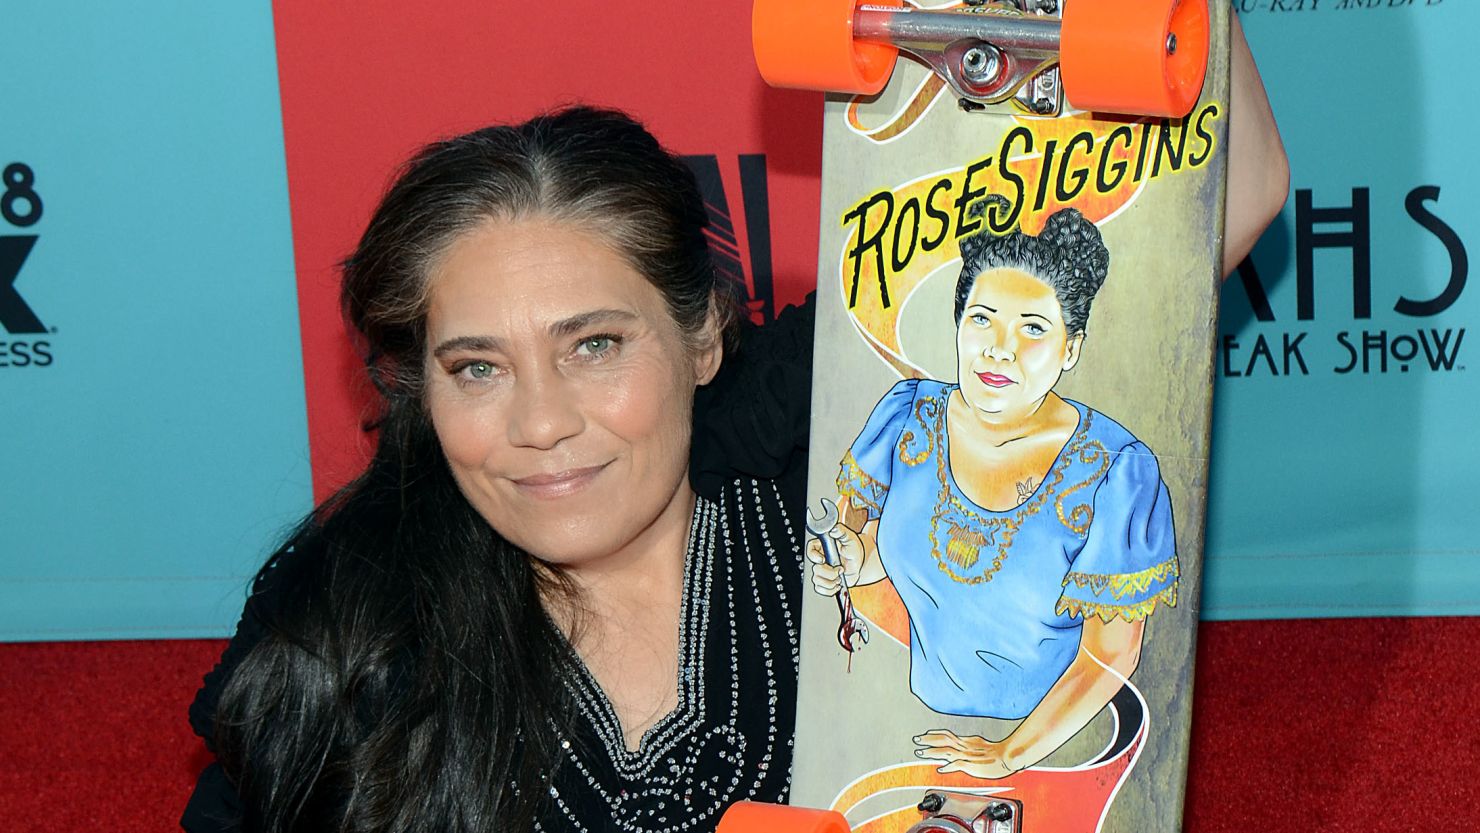 Rose Siggins attends the premiere screening of "American Horror Story: Freak Show" at the TCL Chinese Theatre in Los Angeles.